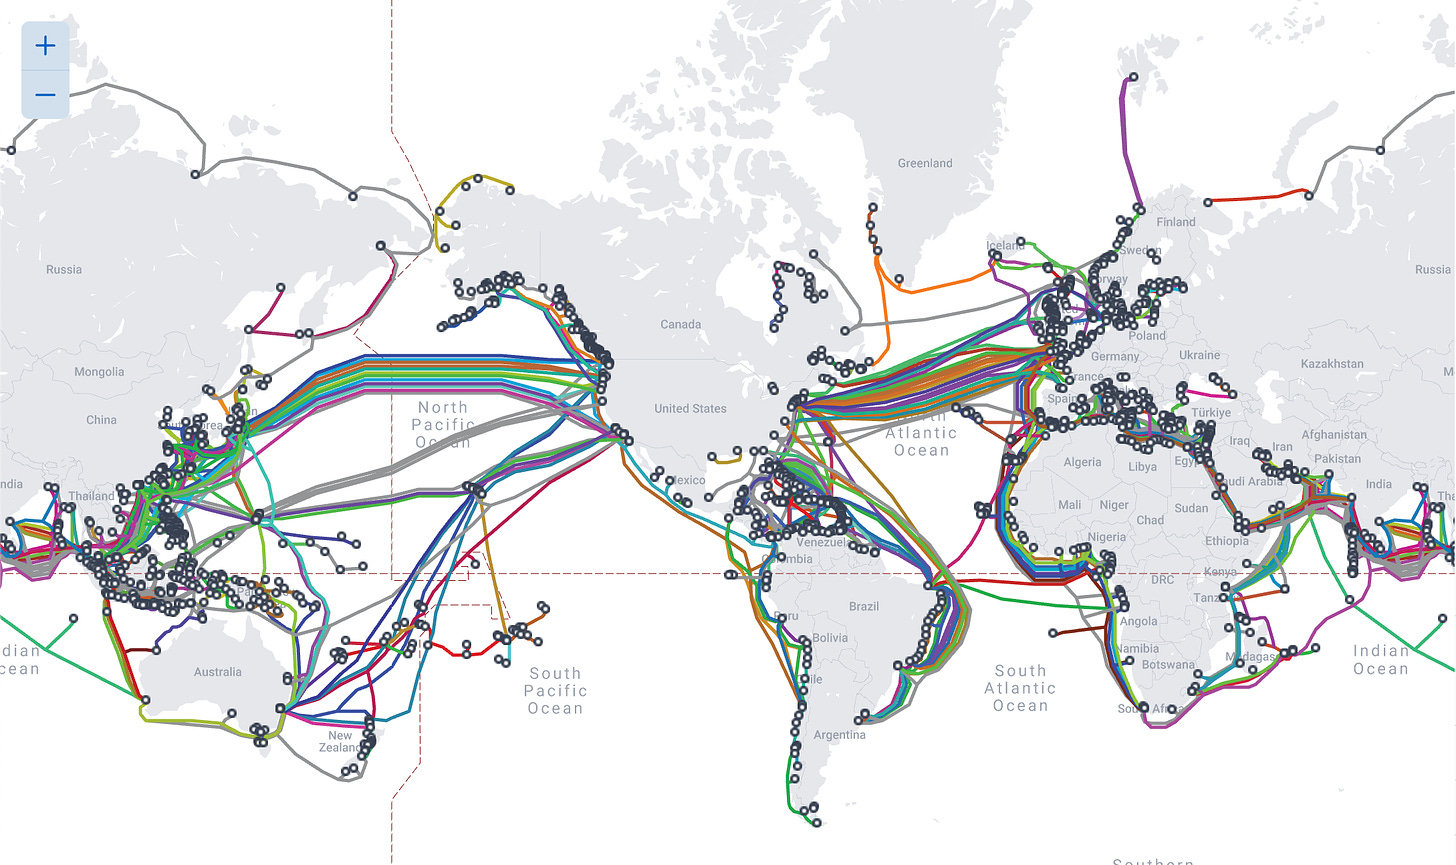 A map of global submarine cables. Colorful lines go from continent to continent.